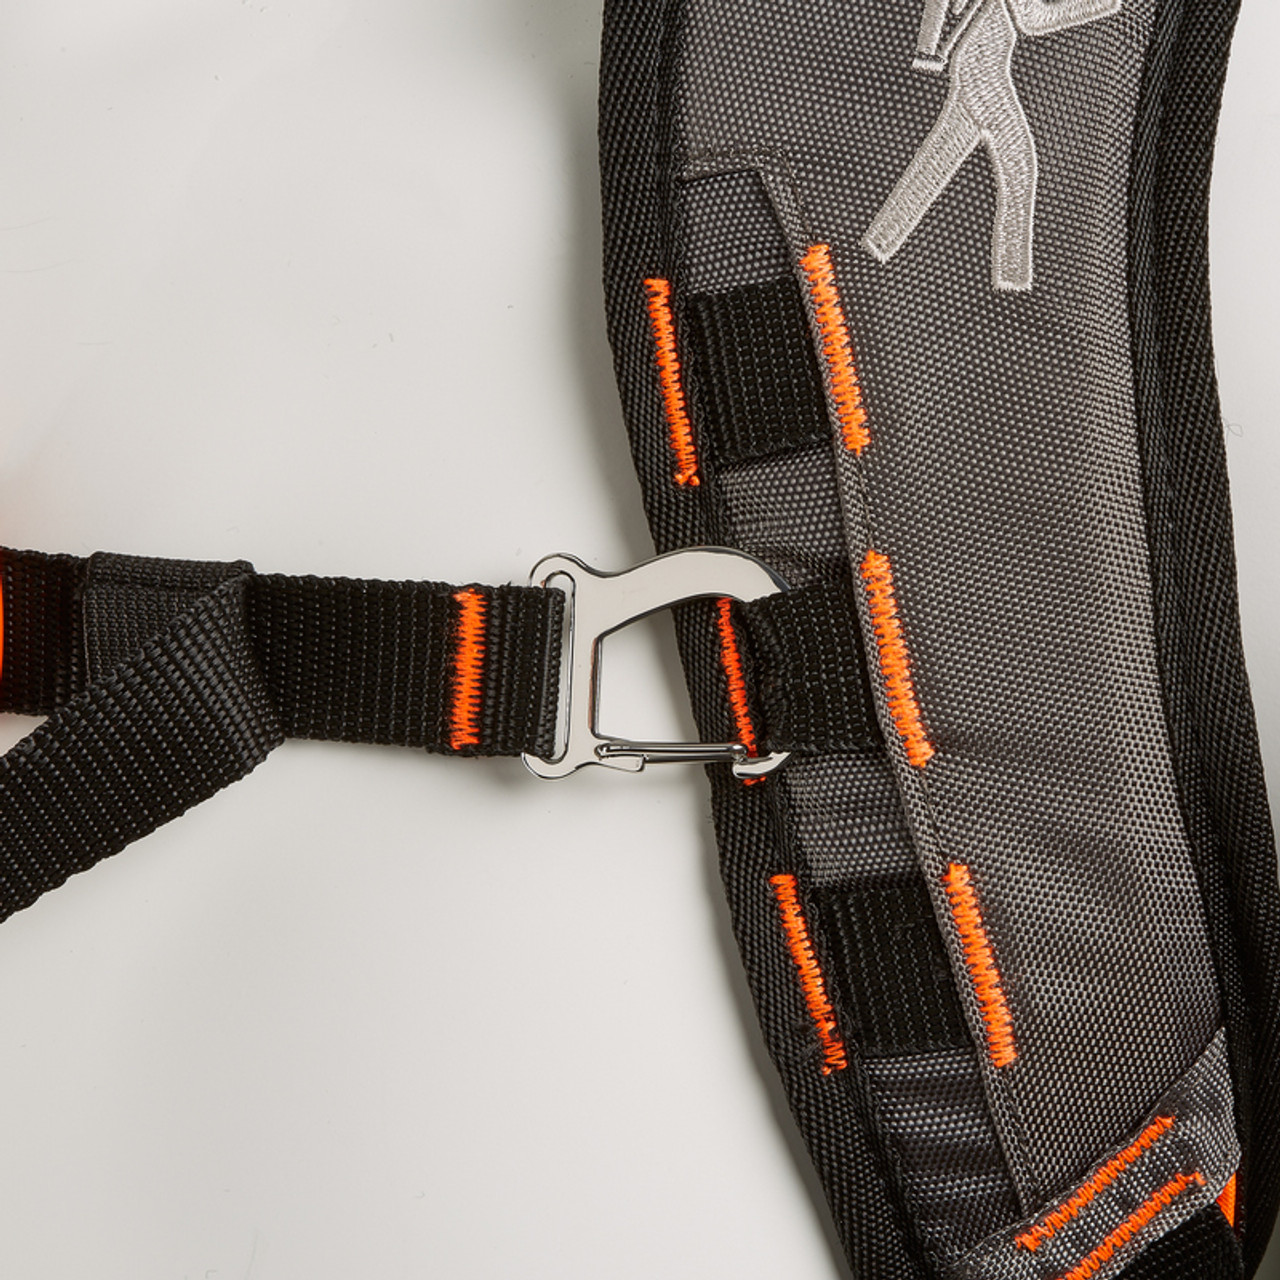 Replacement Chest Strap: Piggyback Rider®